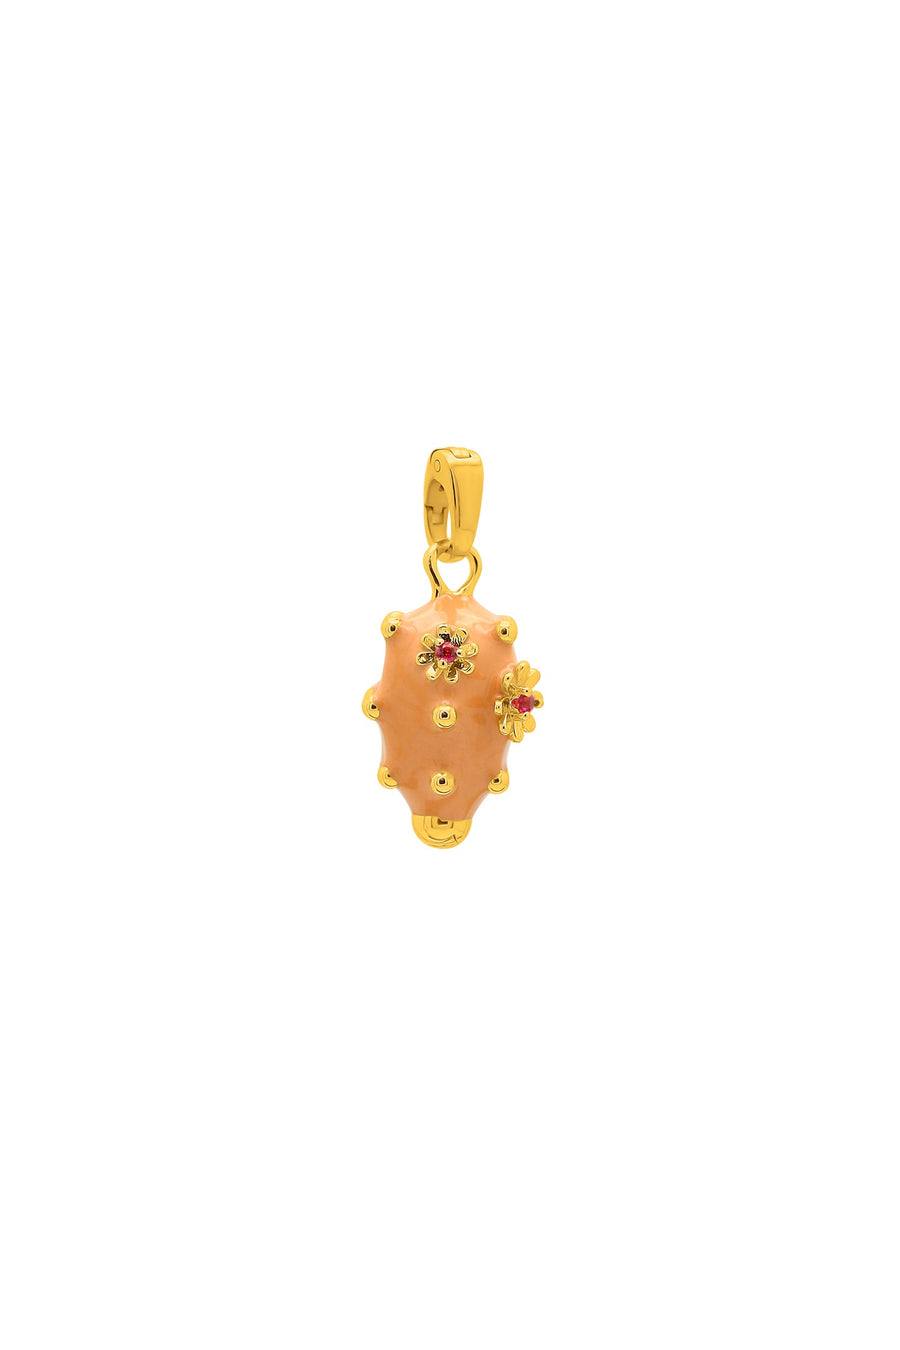 Kelsey's Peach Prickly Pear Pendant Necklace Gift Set